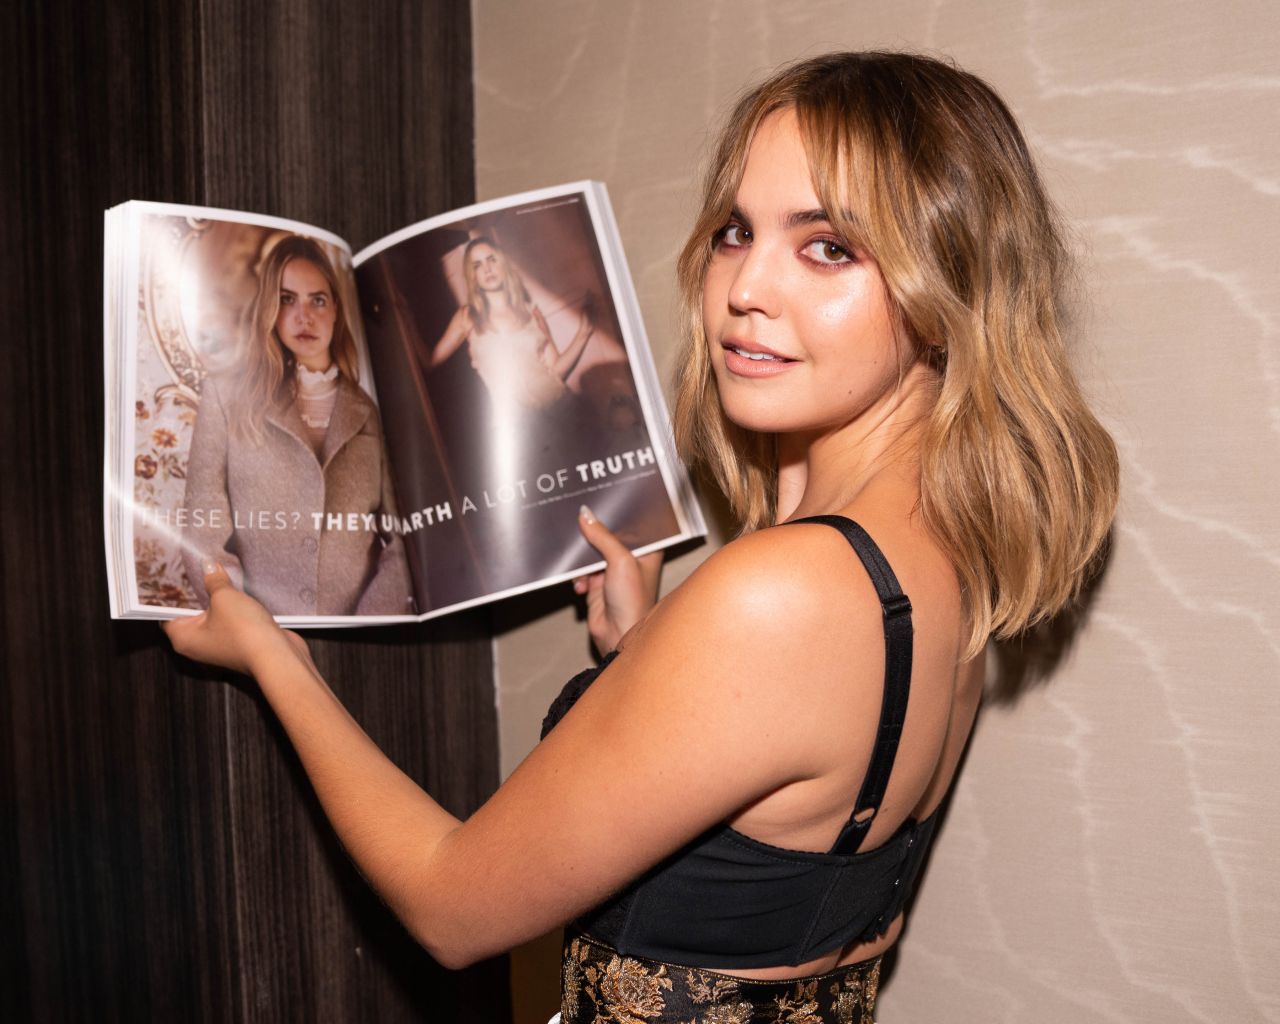 Bailee Madison - Magnlens LA Flagship Launch x Flaunt Magazine "The Fi...